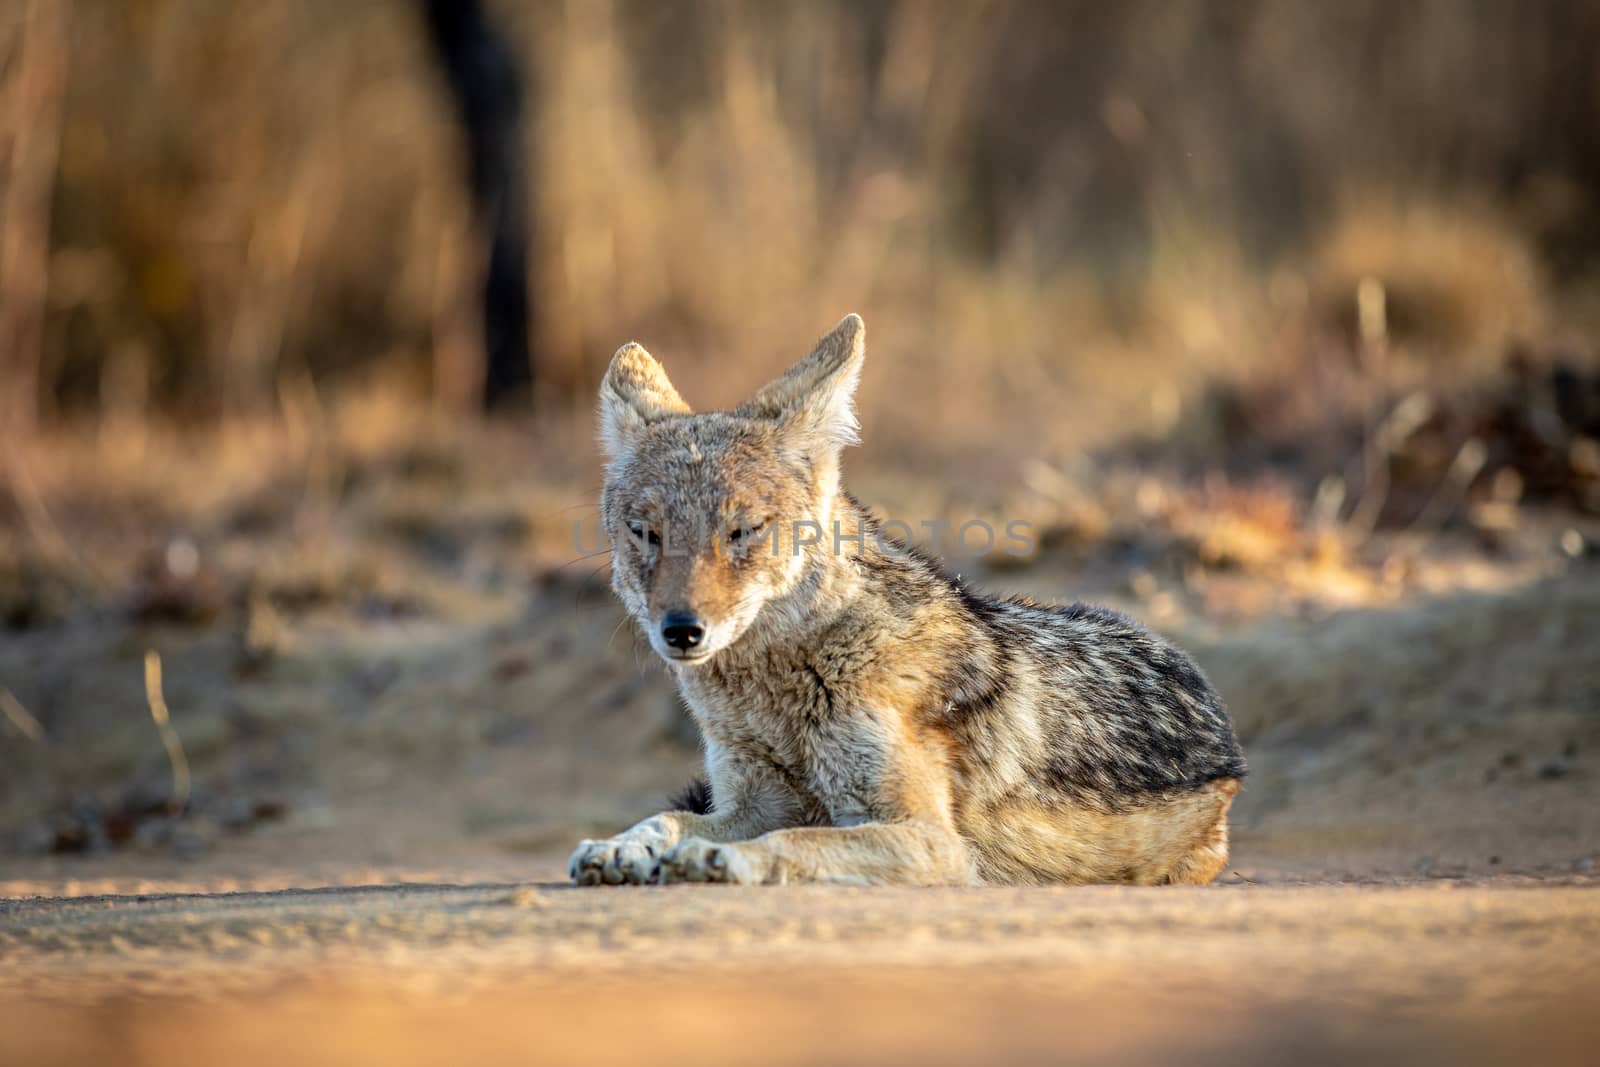 Black-backed jackal laying in the sand. by Simoneemanphotography